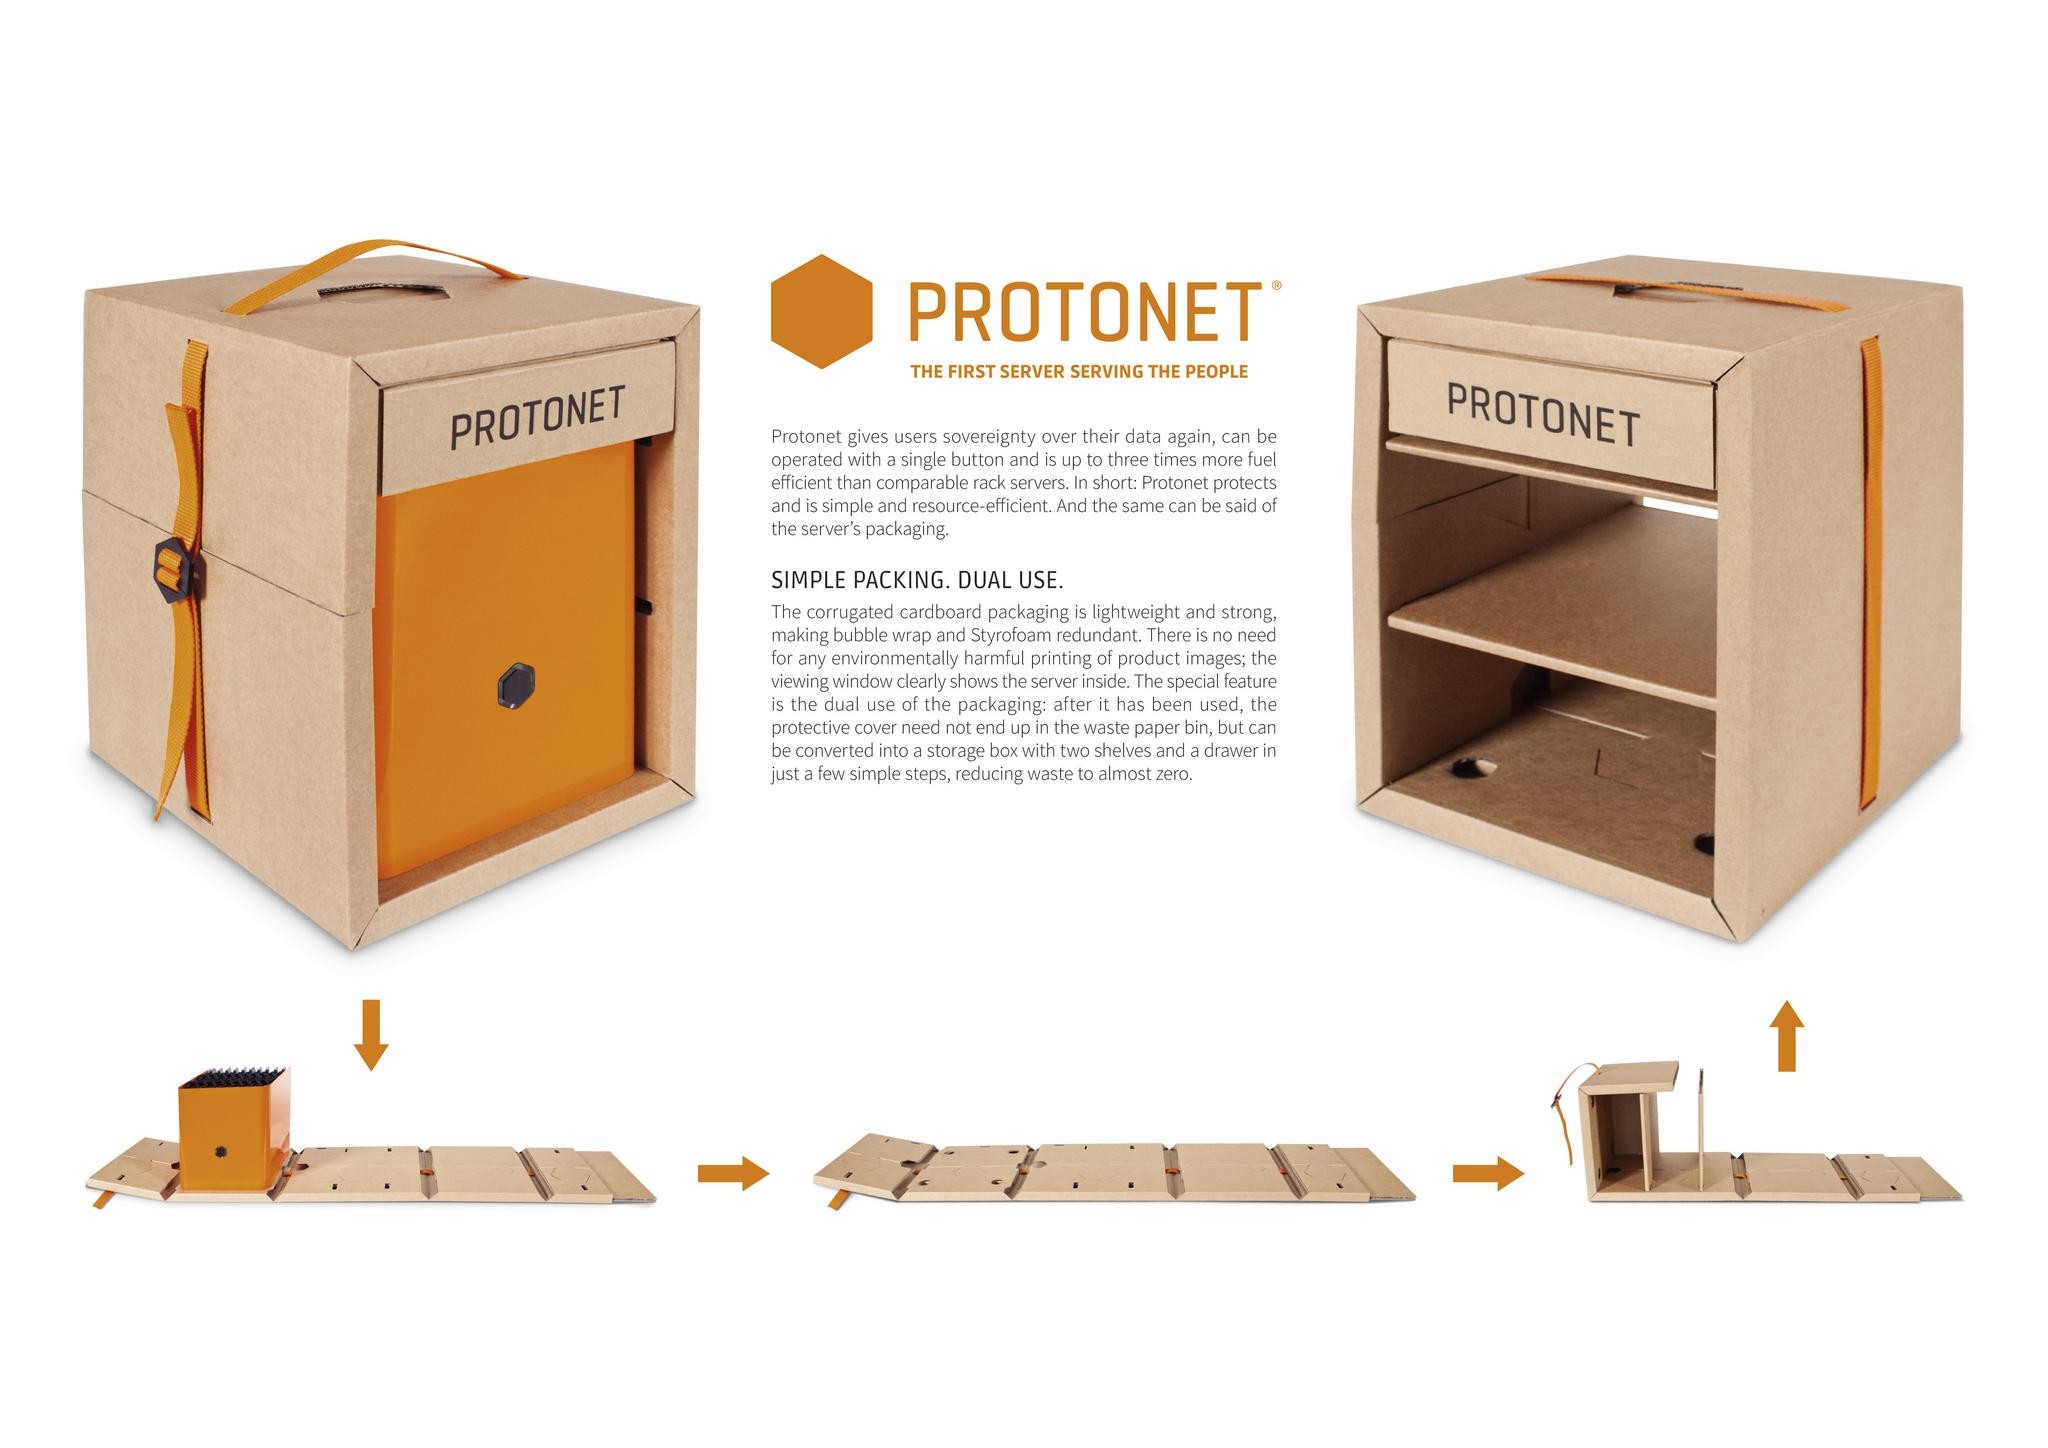 PROTONET - THE FIRST SERVER SERVING THE PEOPLE.